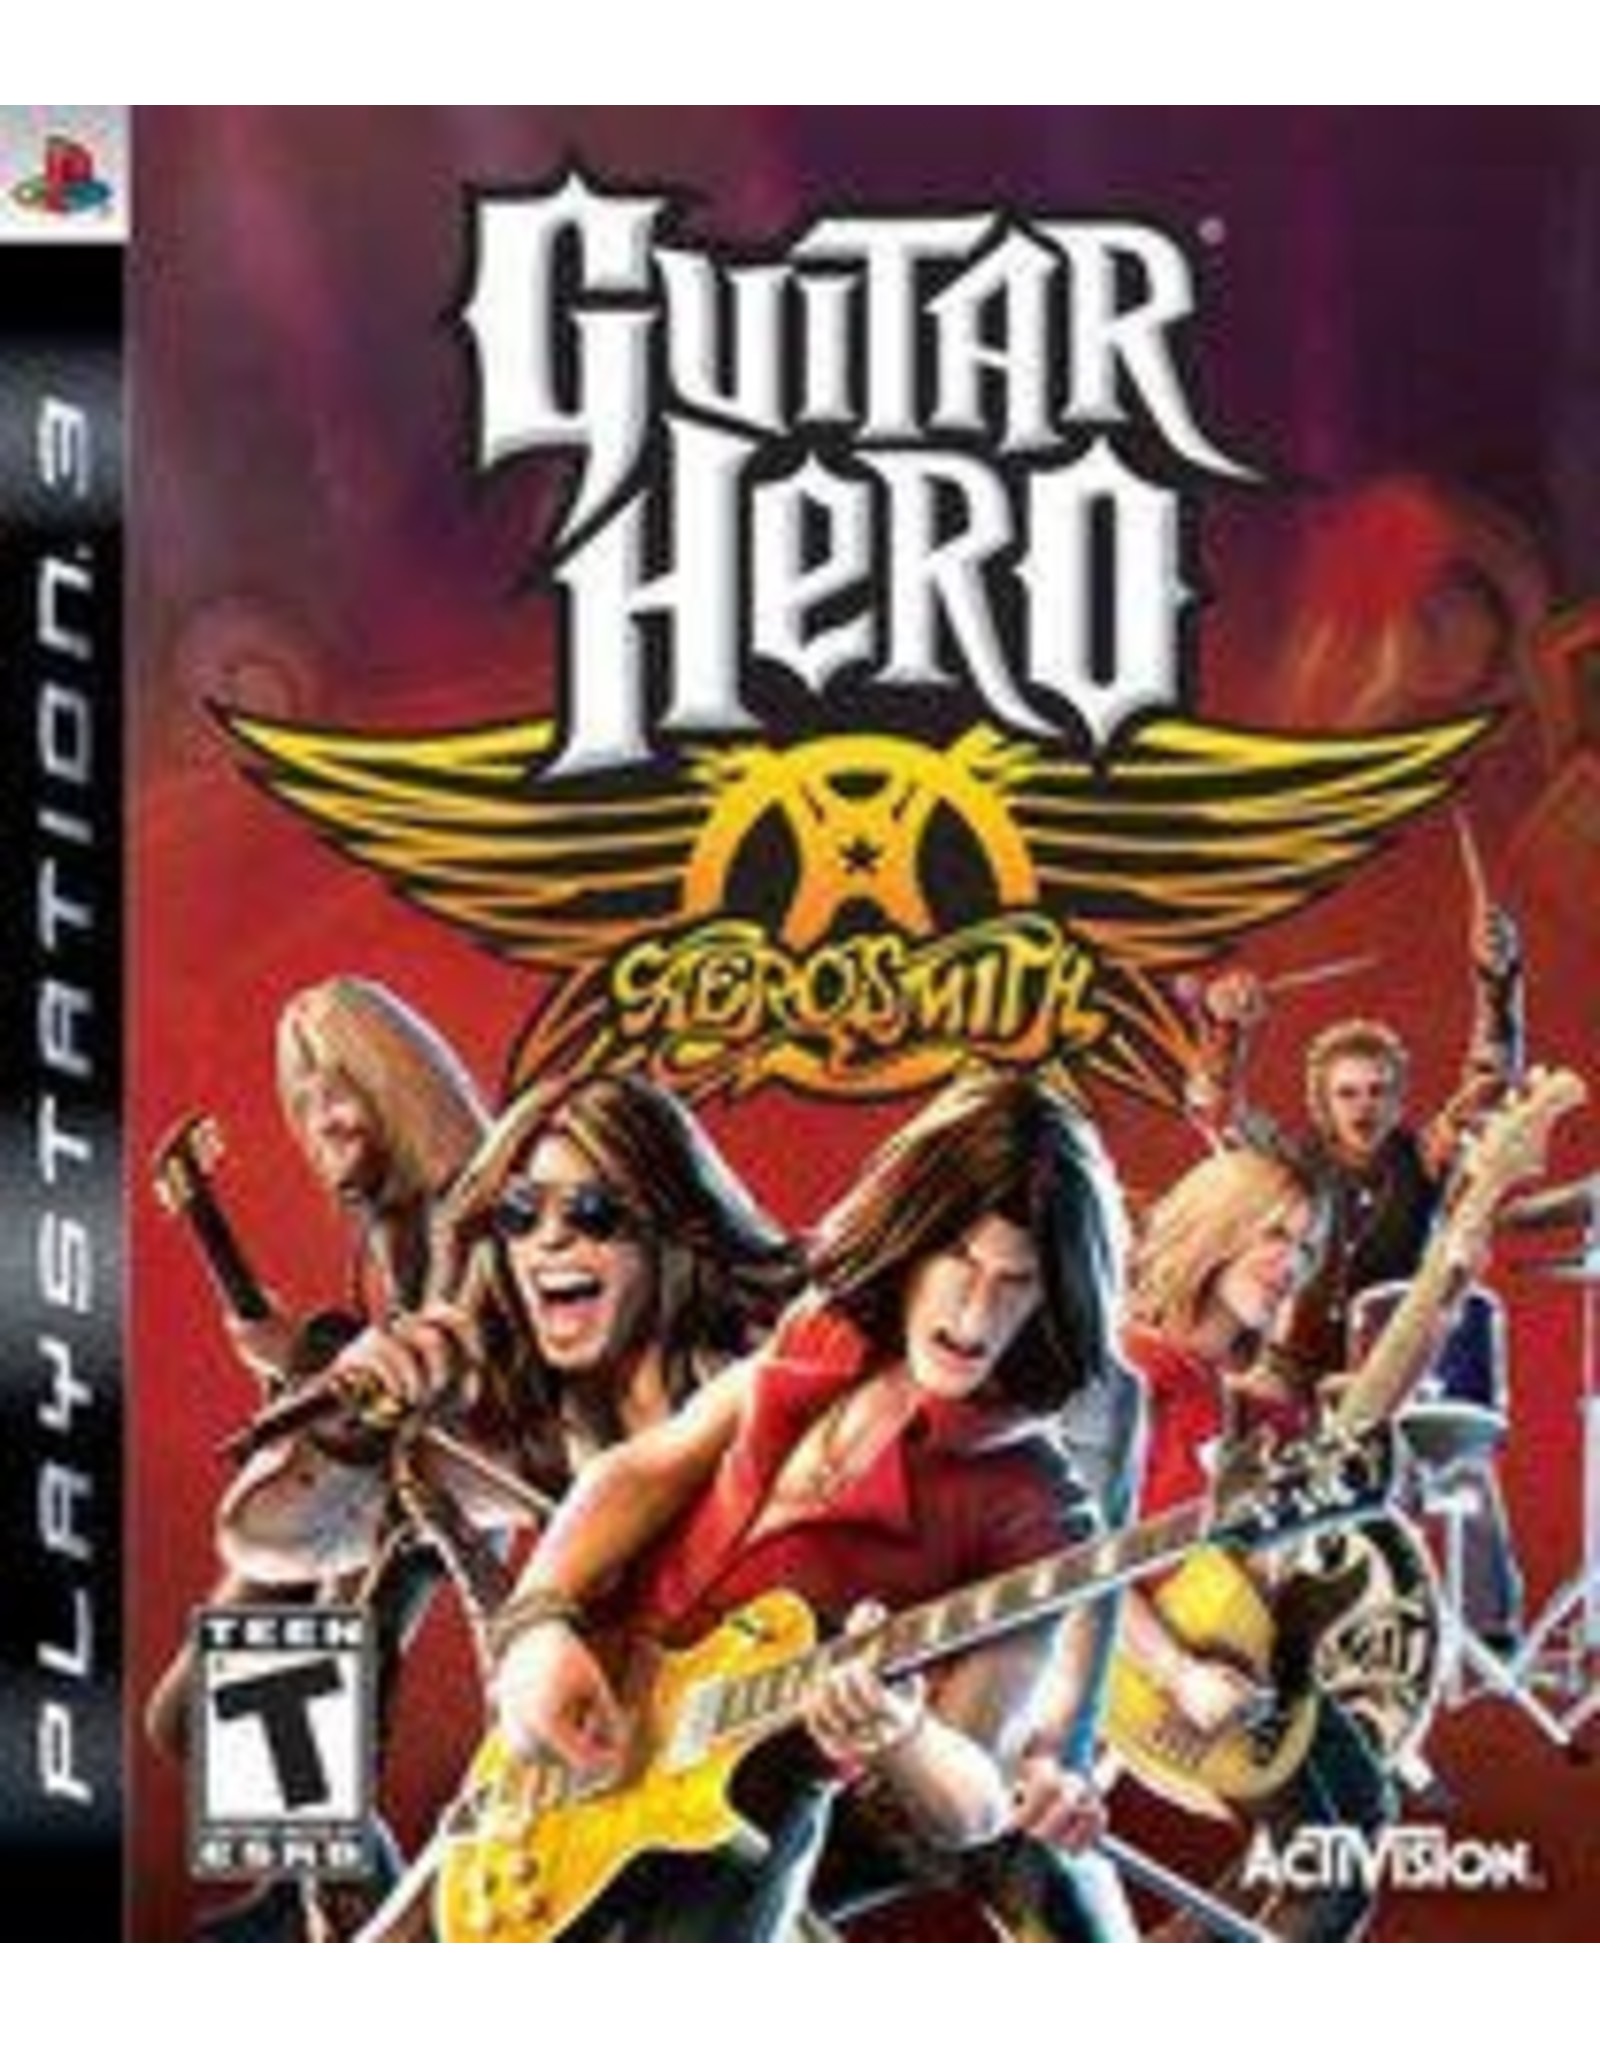 Guitar Hero III Legends Of Rock PC DVD-ROM Game Activision, GAME ONLY -  Sealed